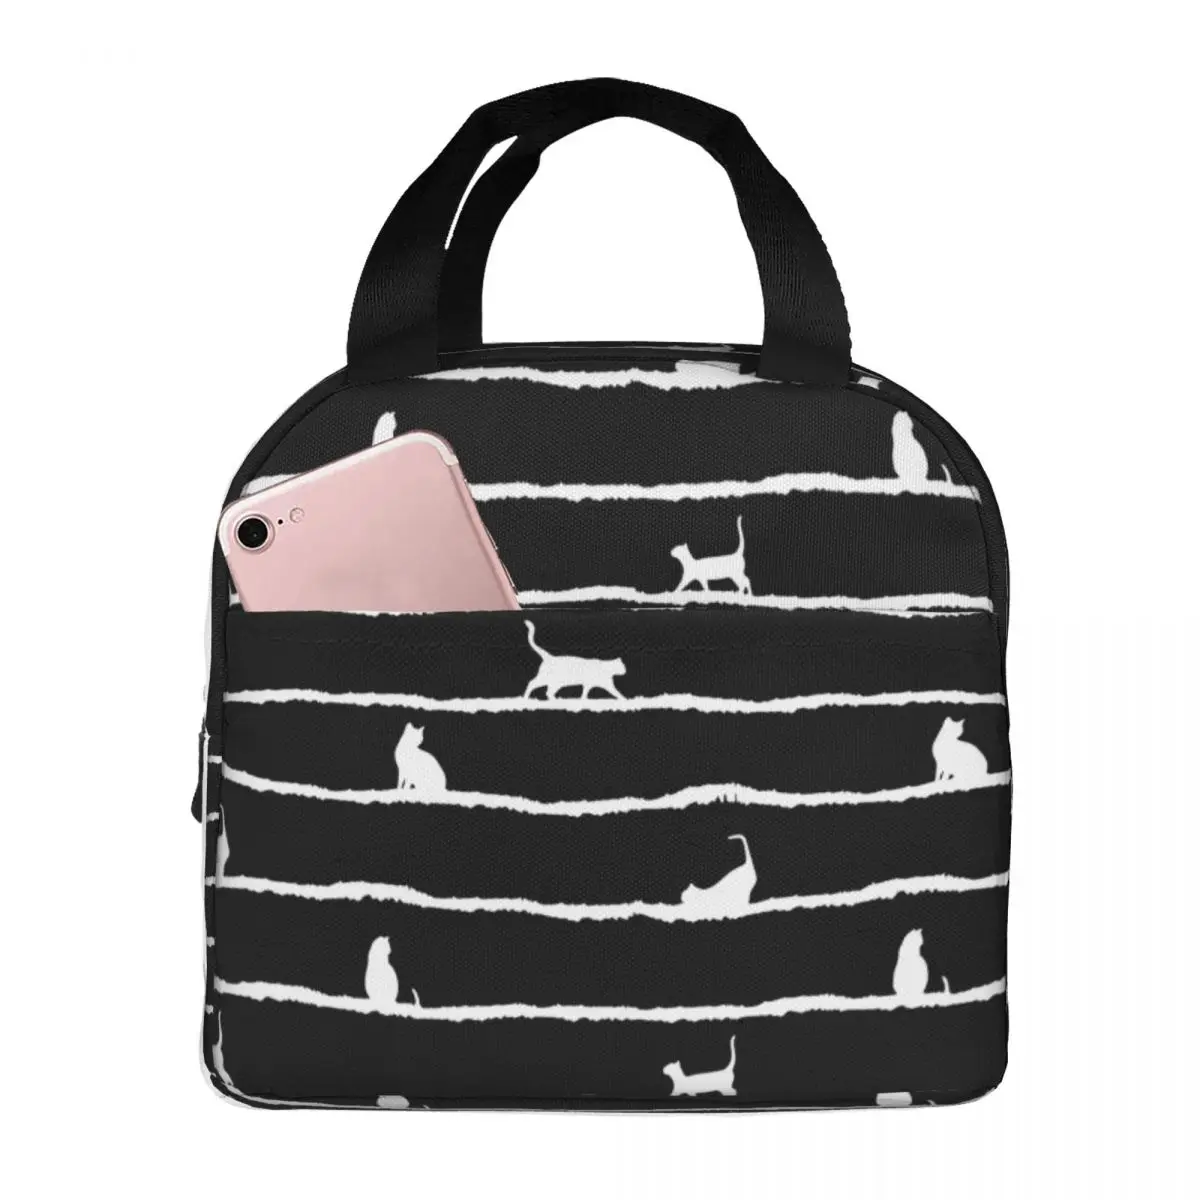 Lunch Bags for Men Women Black Cat Insulated Cooler Portable School Cute Animal Canvas Lunch Box Bento Pouch